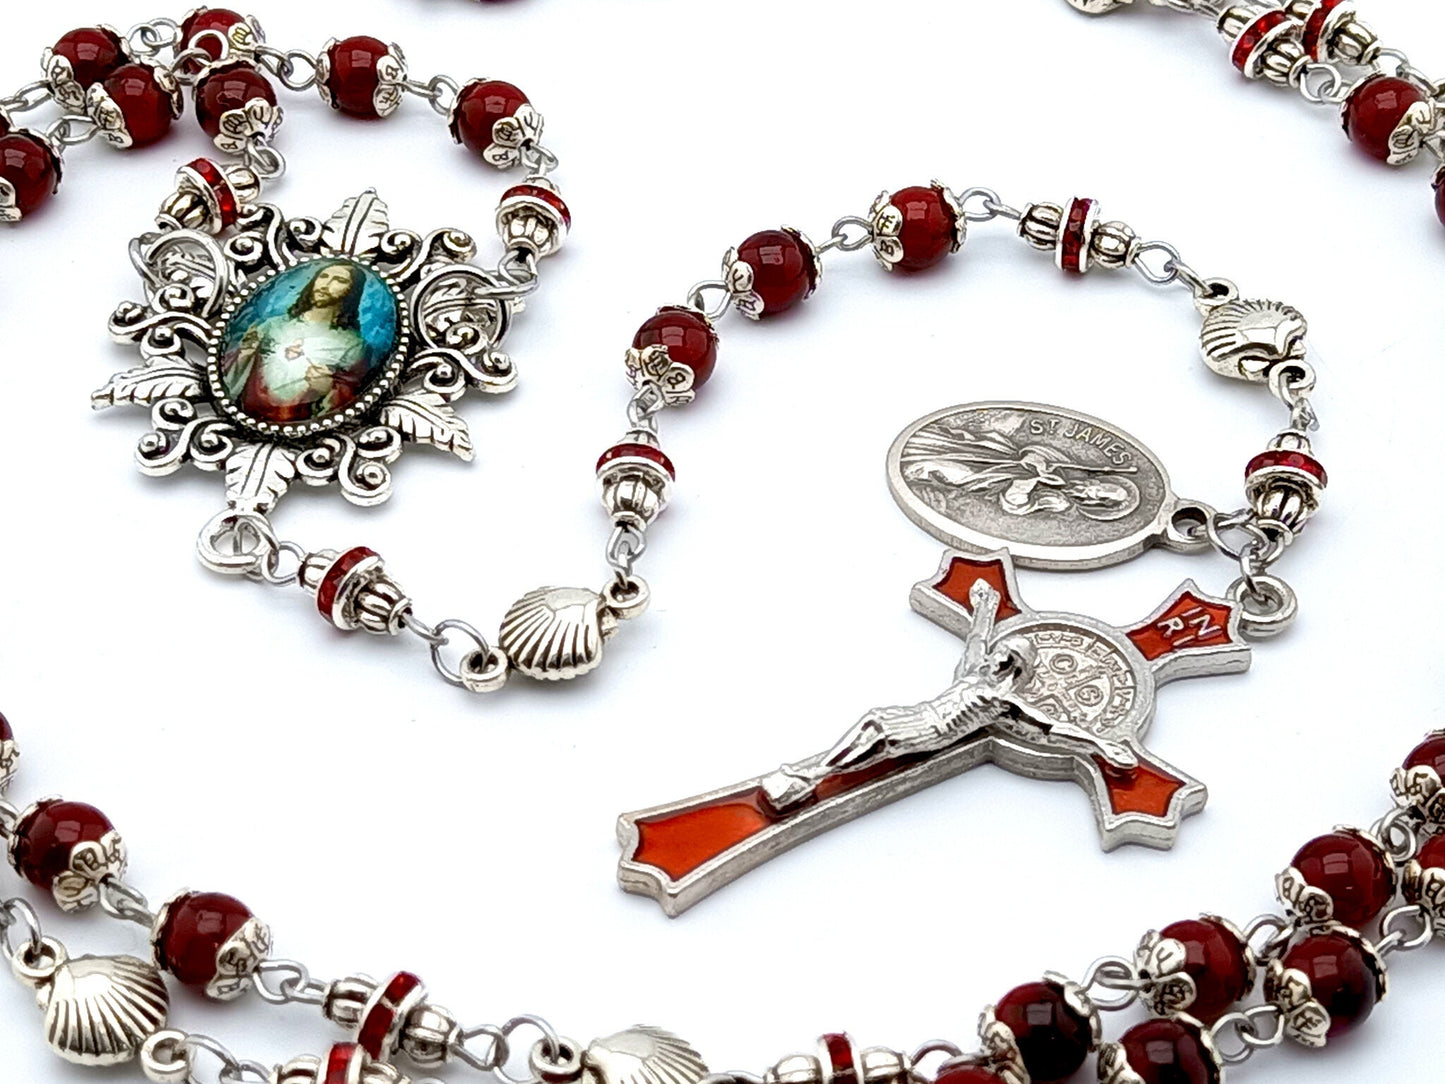 Sacred Heart unique rosary beads with red glass and silver shell beads, red enamel crucifix and picture centre medal.